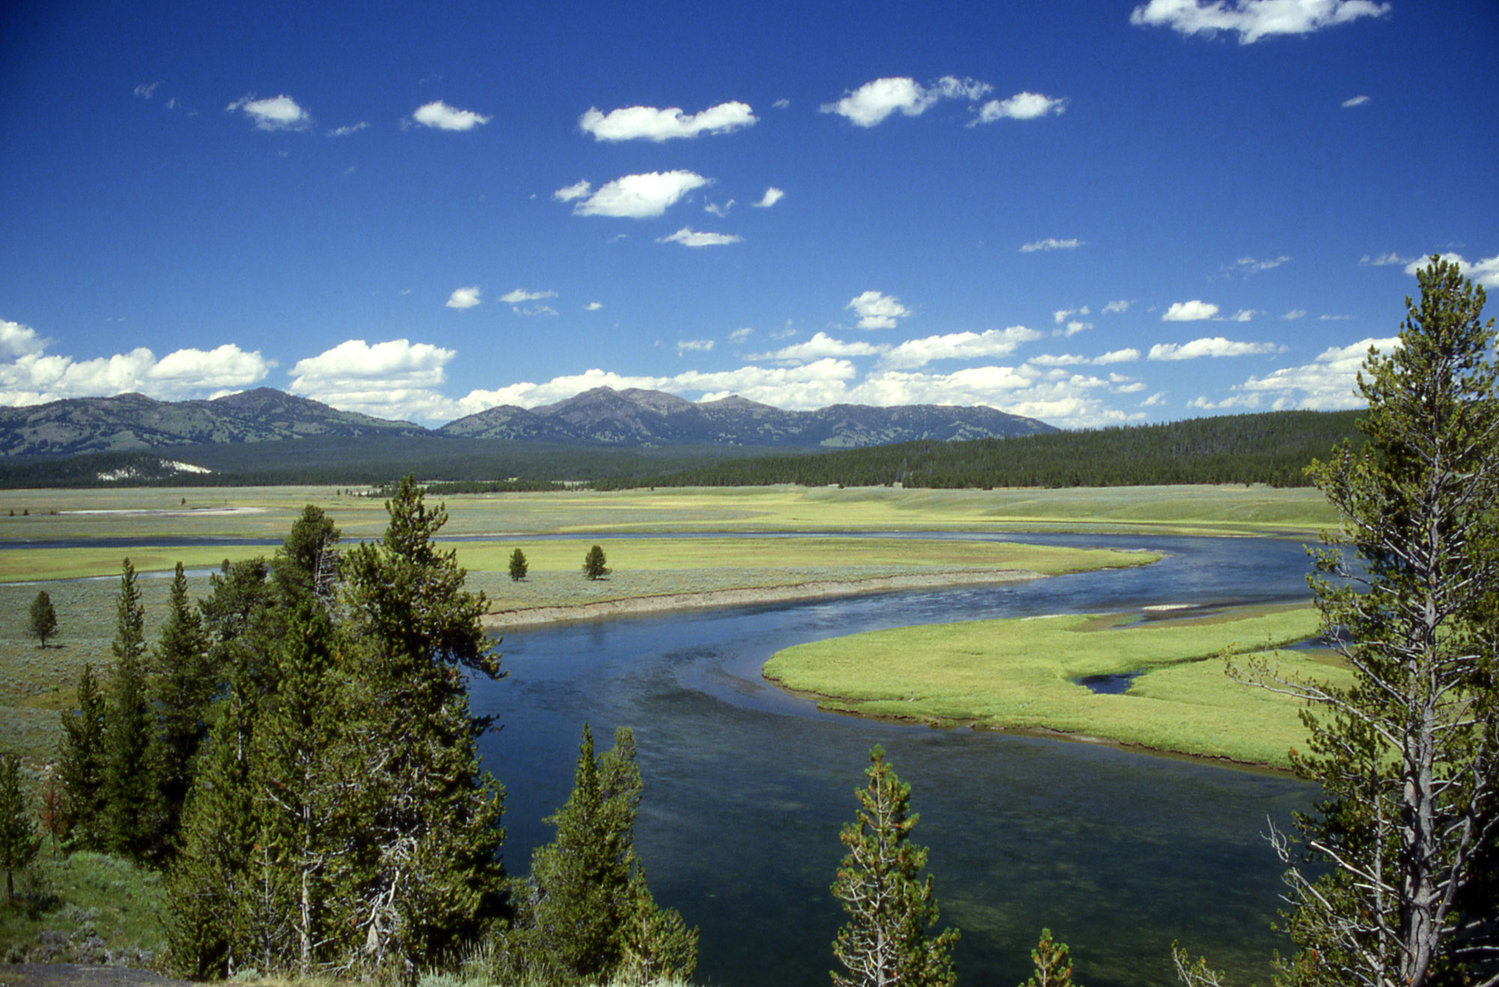 The Yellowstone River in Yellowstone National Park.